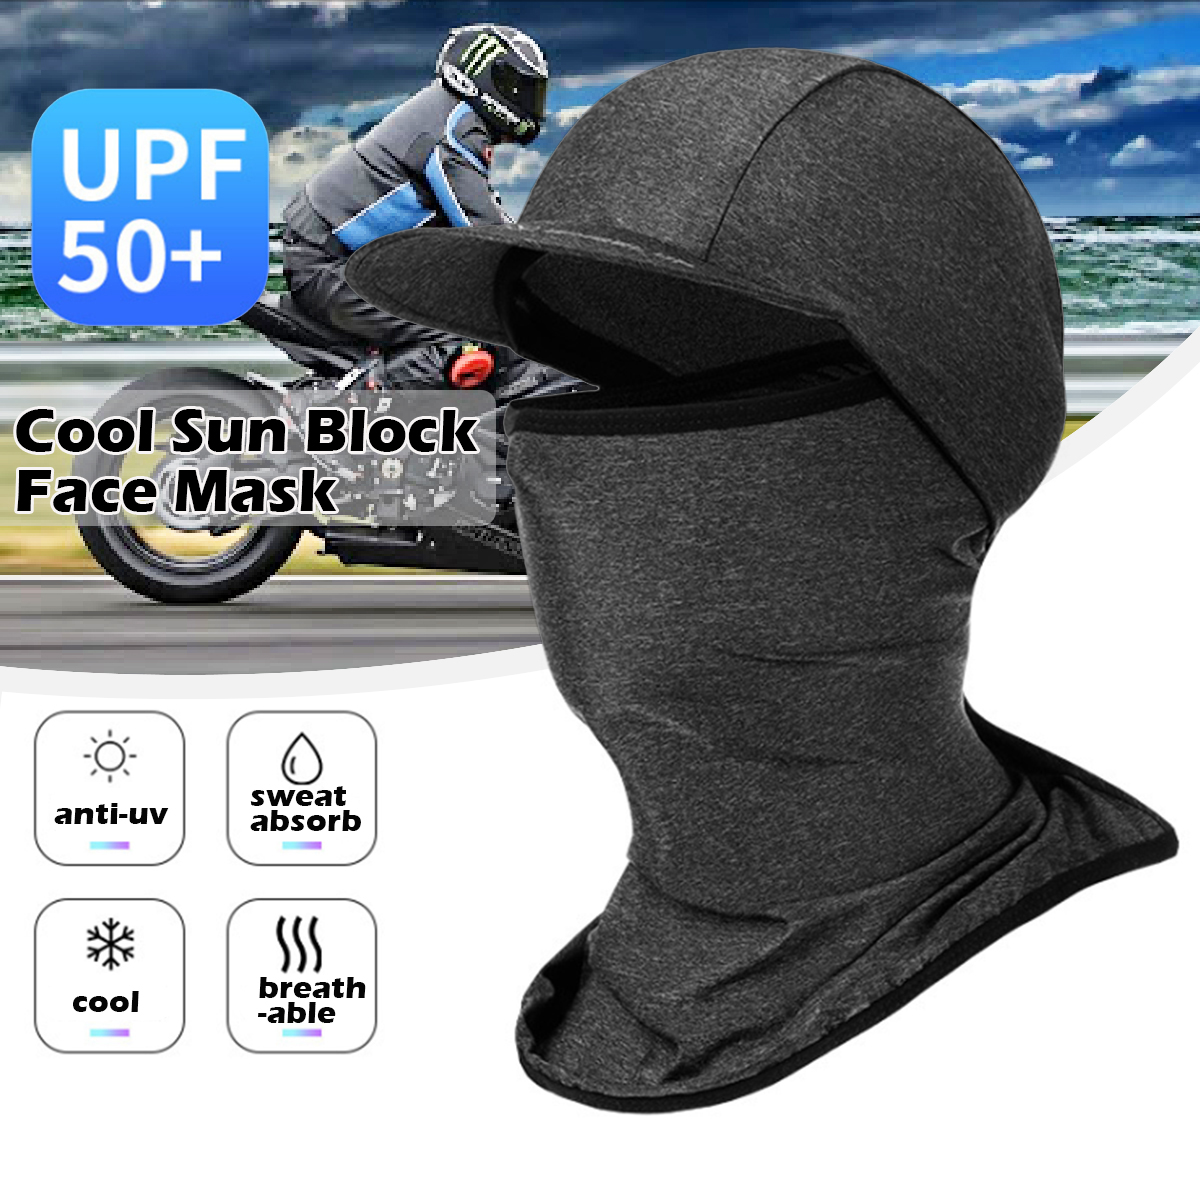 New Full Face Mask Cool Summer Motorcycle Outdoor Riding Mask ...